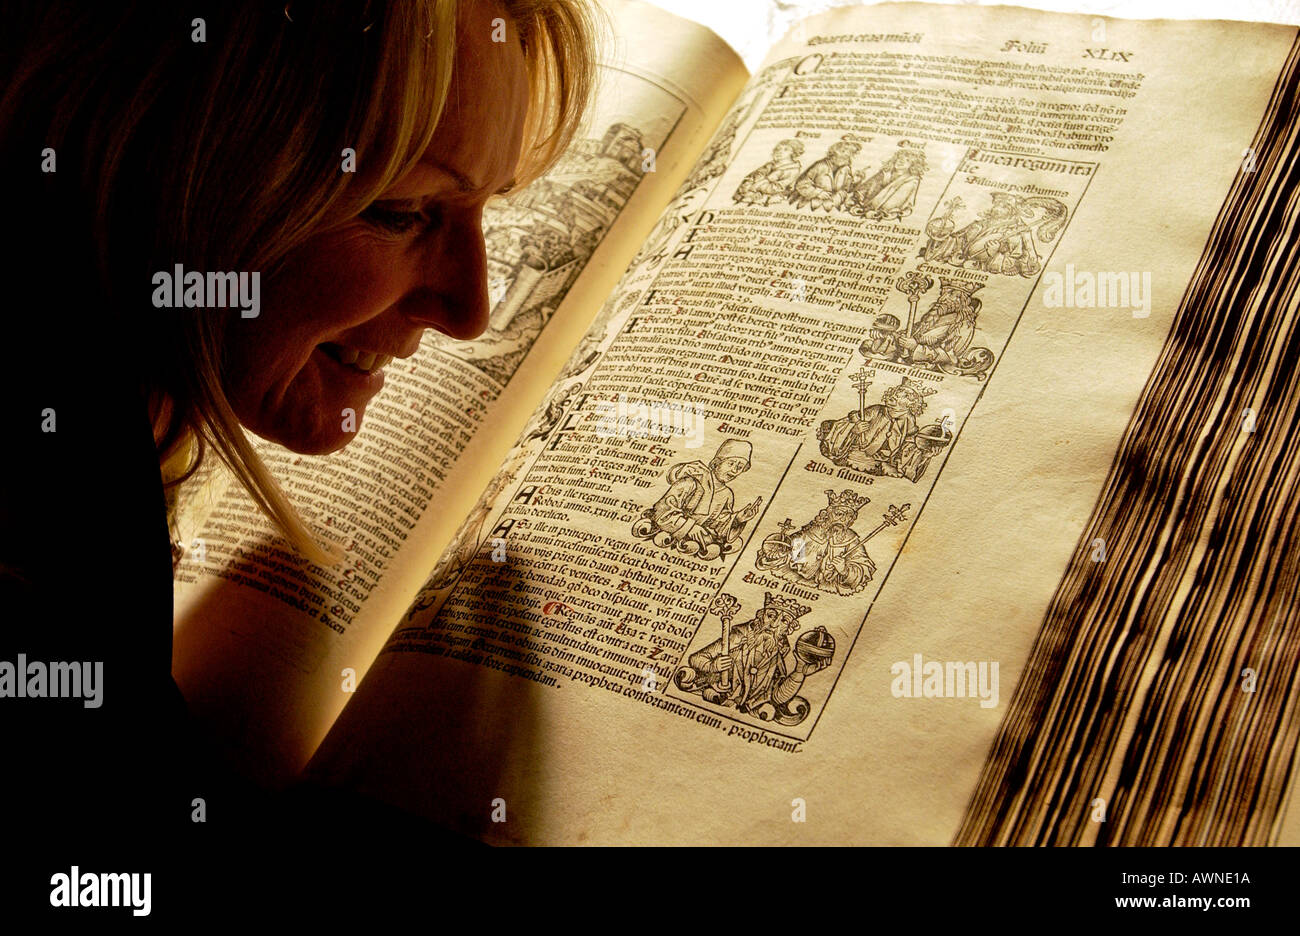 A woman librarian examines an ancient book The Nuremberg Chronicle from 1493 in Brighton Library's rare book section Stock Photo